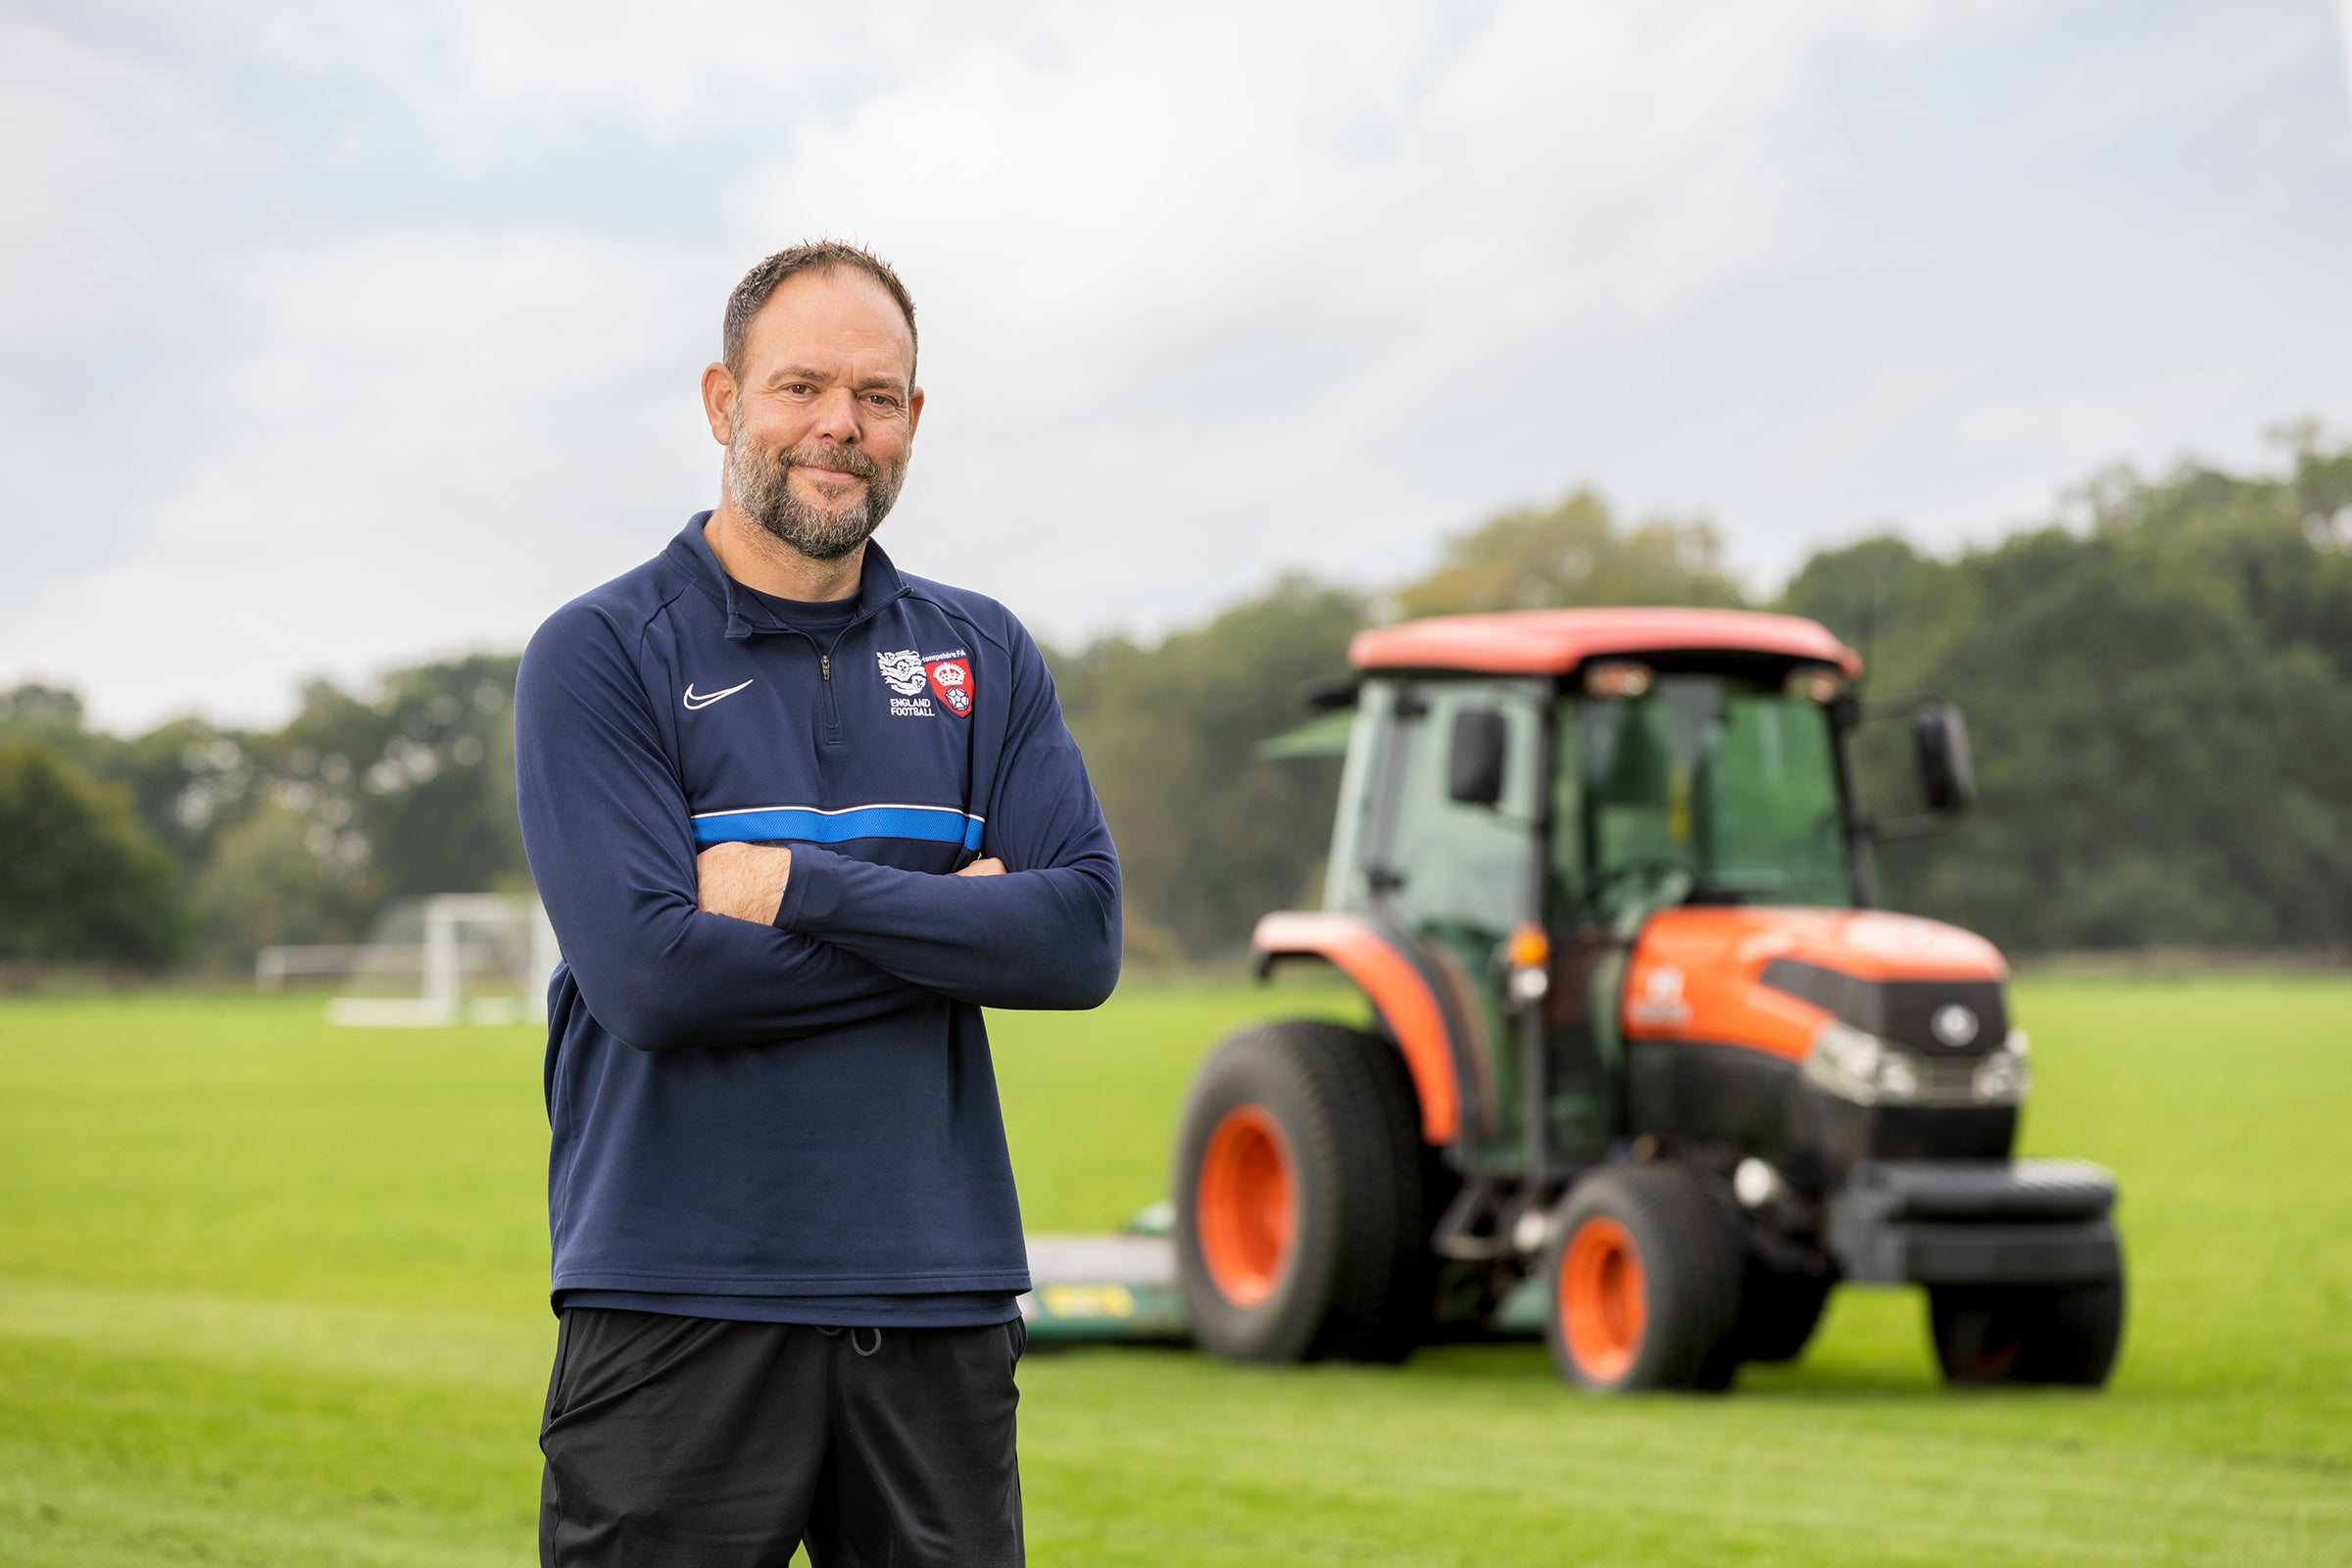 One Kubota Tractor extends to full partnership deal for Hampshire FA